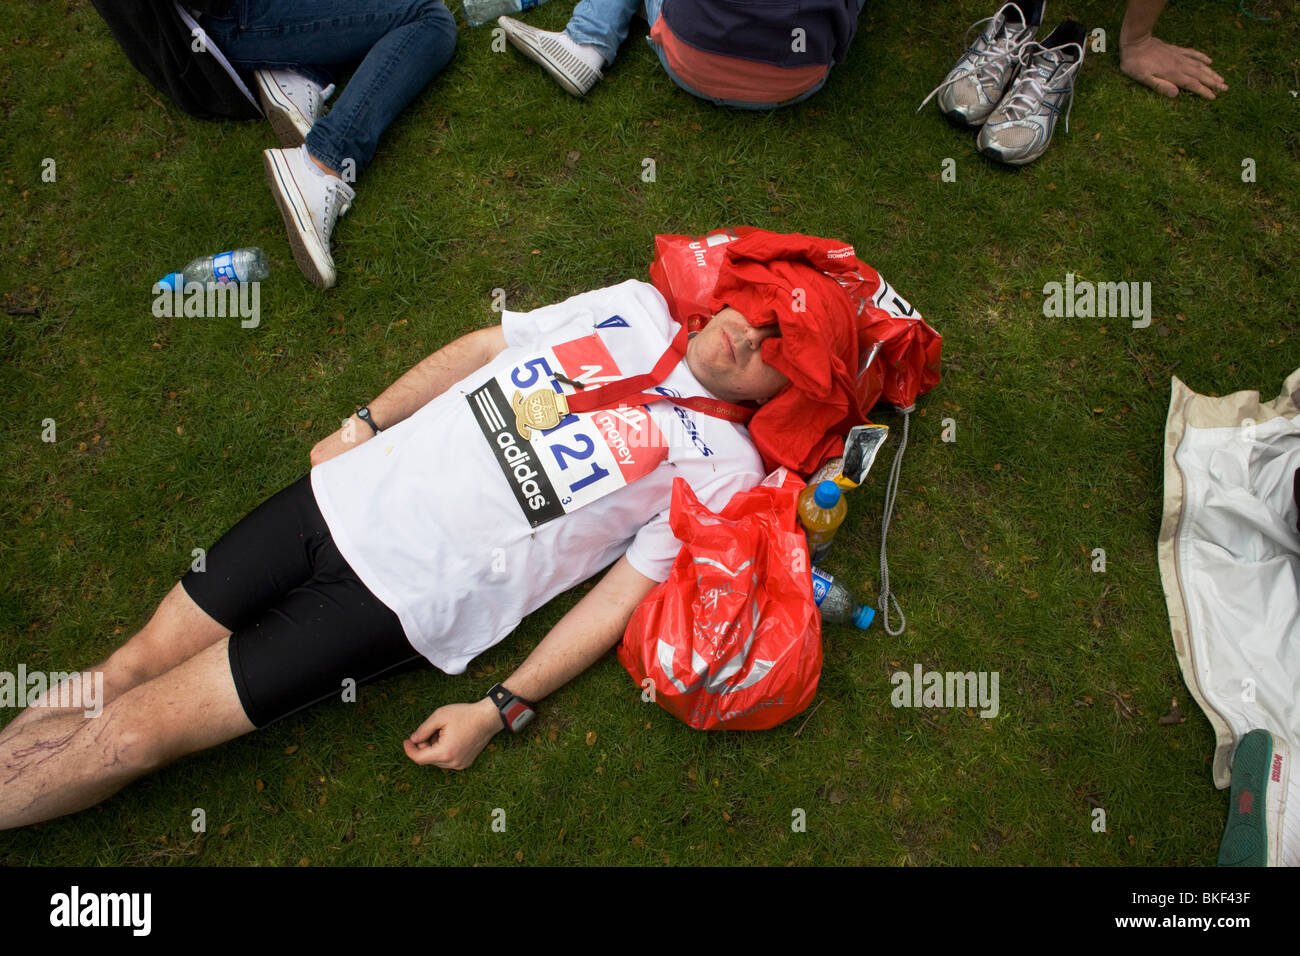 With face covered and medal around neck, a London Marathon runner collapsed on grass, before being met by family Stock Photo